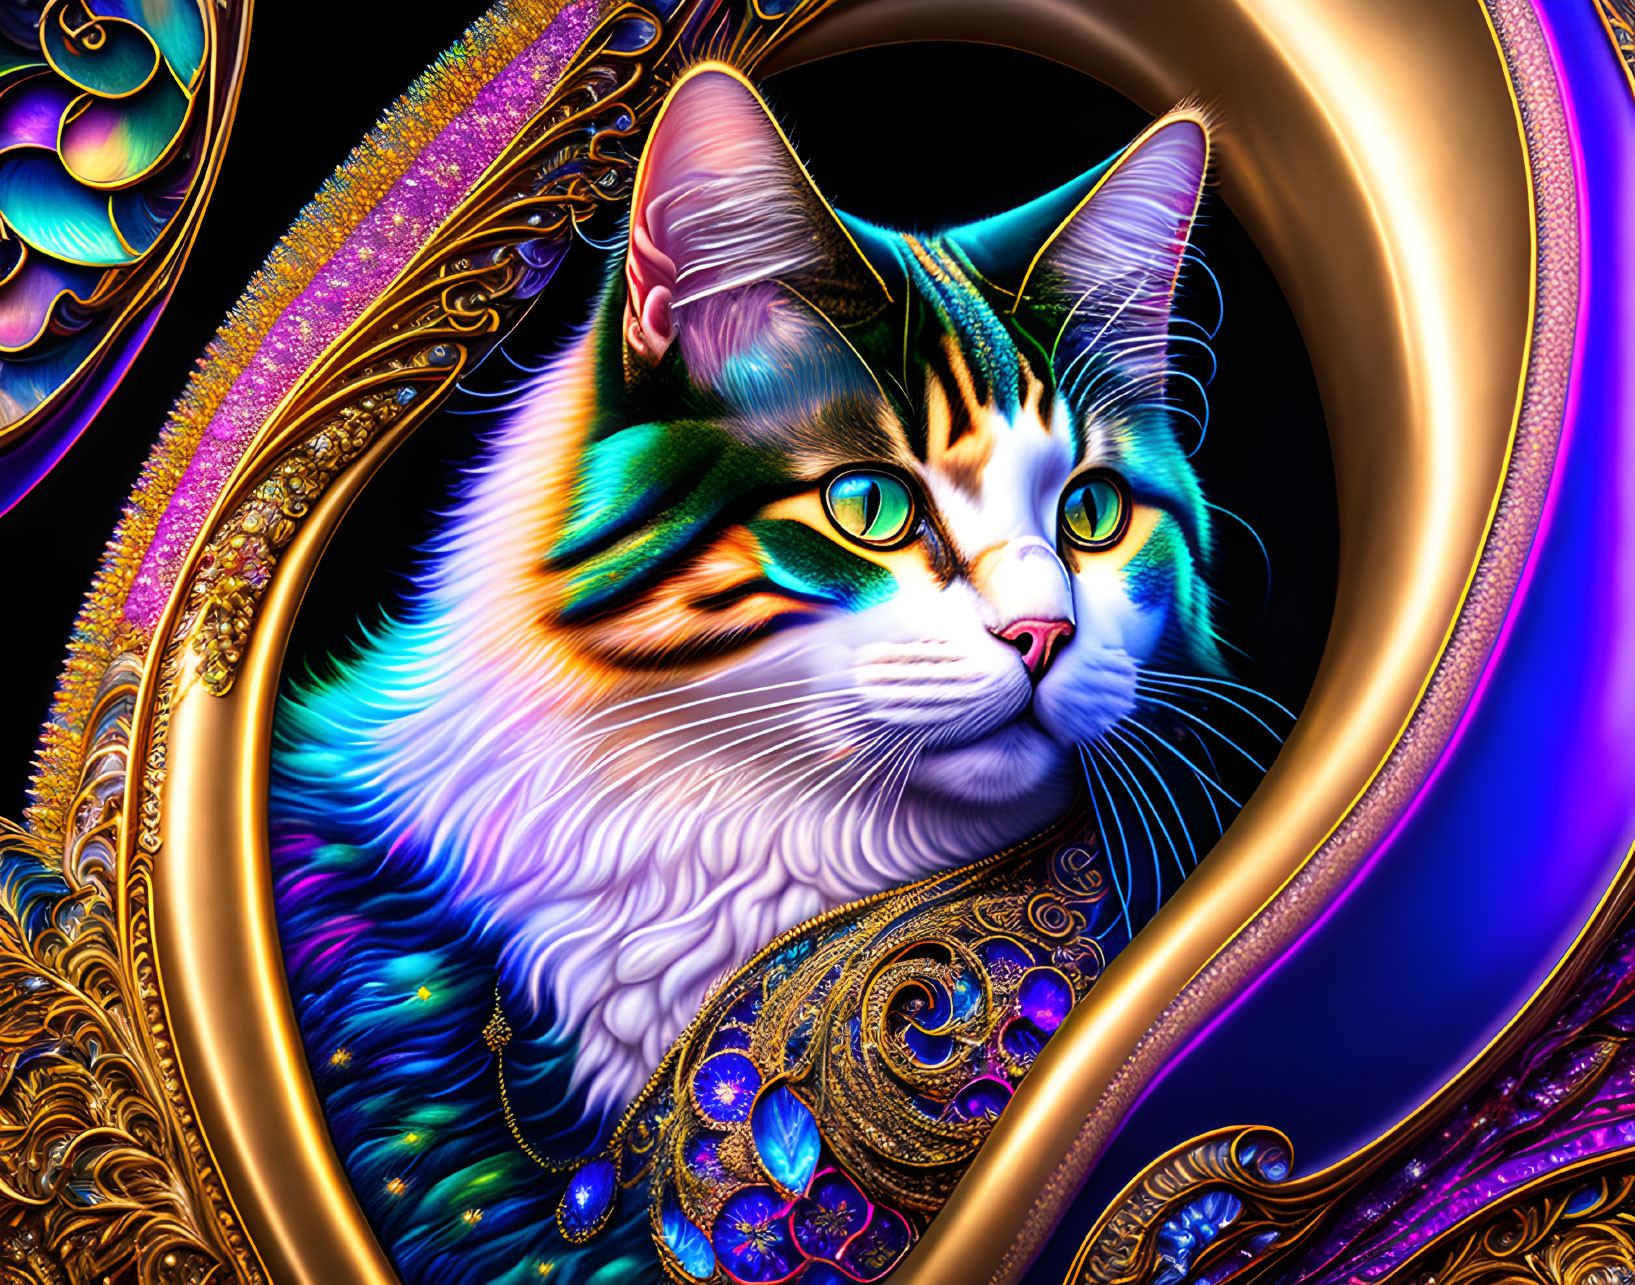 Colorful Digital Artwork: Multicolored Cat with Intricate Patterns and Glowing Eyes on Orn